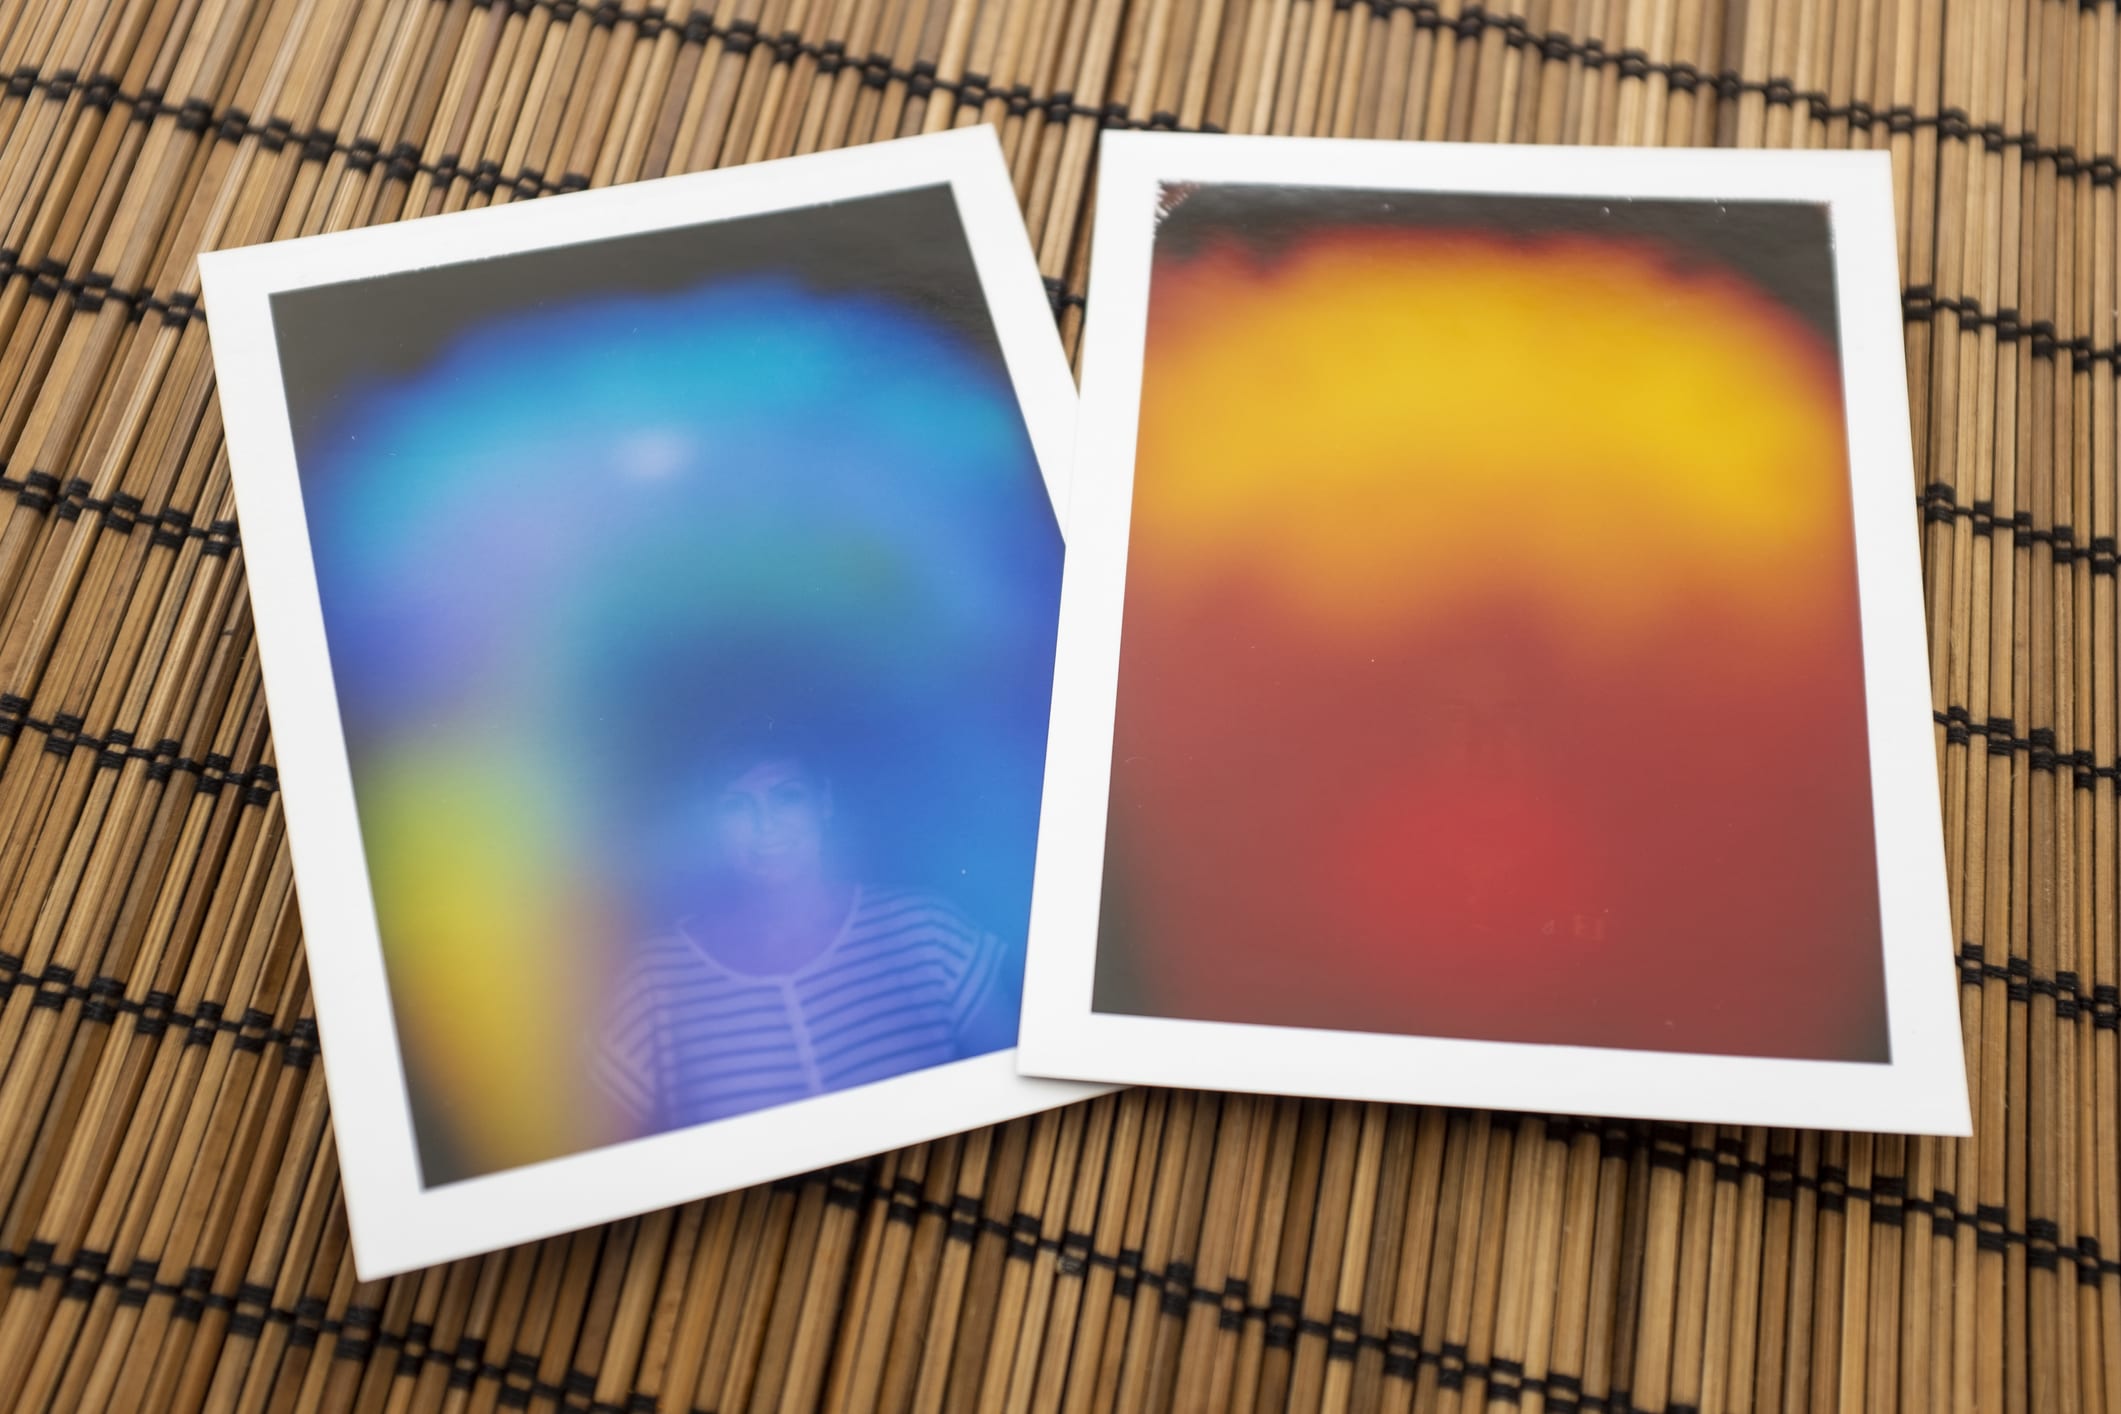 Byron Bay, Australia - November 14, 2014: Printed photos capturing a person's "aura", or the electromagnetic field that surrounds the body. The different colours are said to reveal a particular aspect of your personality.